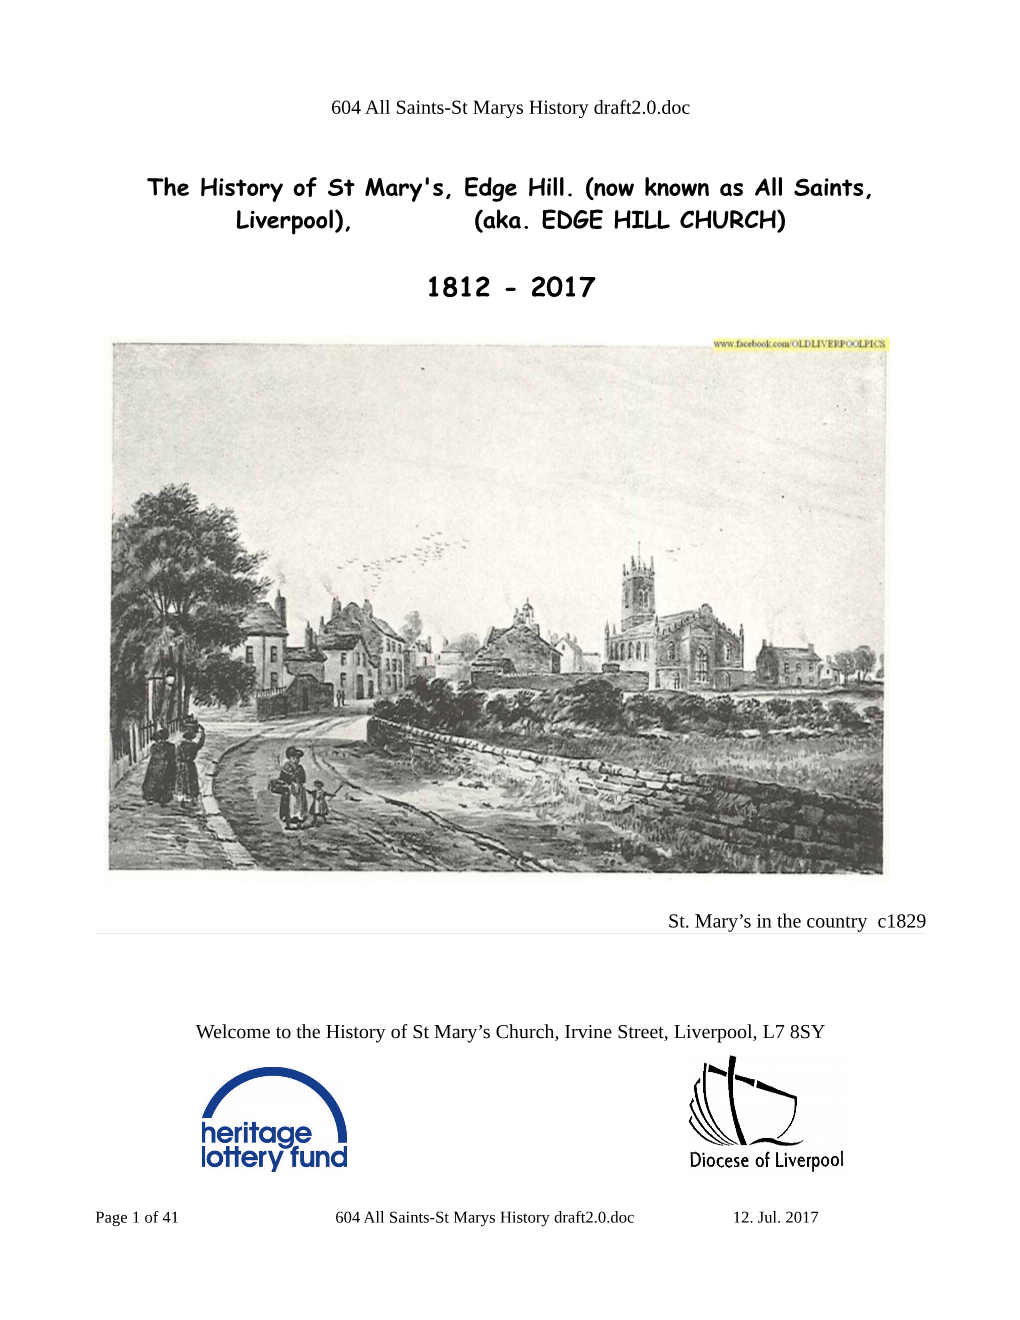 The History of St Mary's, Edge Hill. (Now Known As All Saints, Liverpool), (Aka